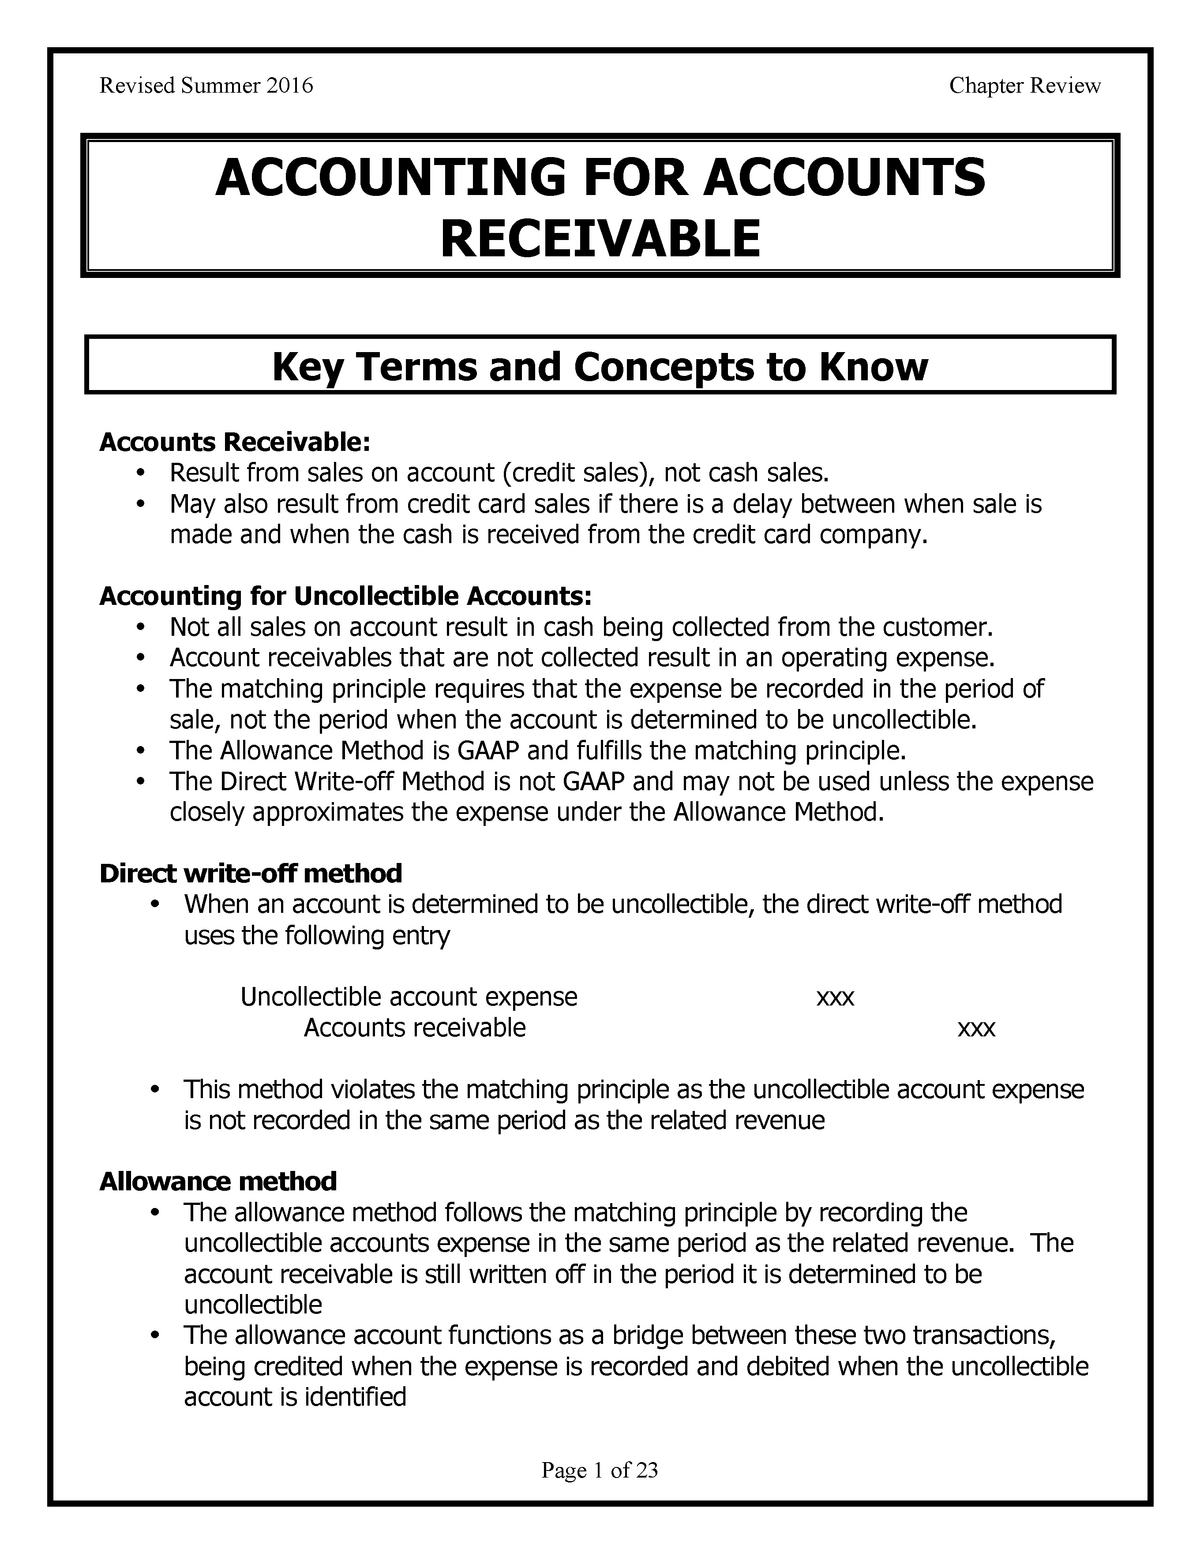 ucc assignment of accounts receivable